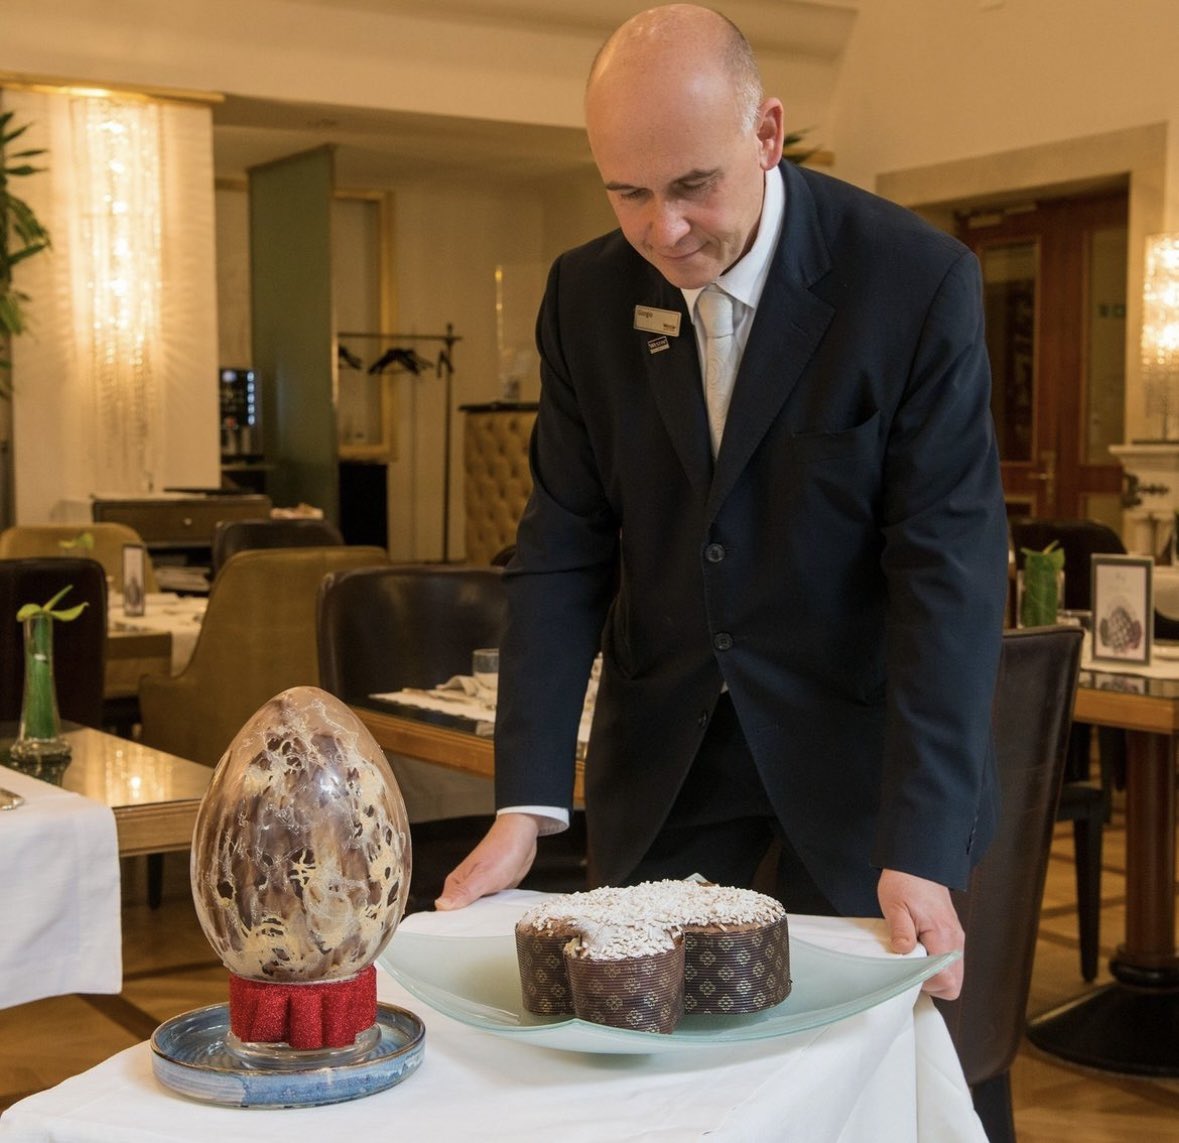 Almost ready for a delicious Easter Sunday together. Play well and enjoy traditional Italian recipes and chocolate eggs decoration for the little ones. #EasterBreak #rome #westinrome